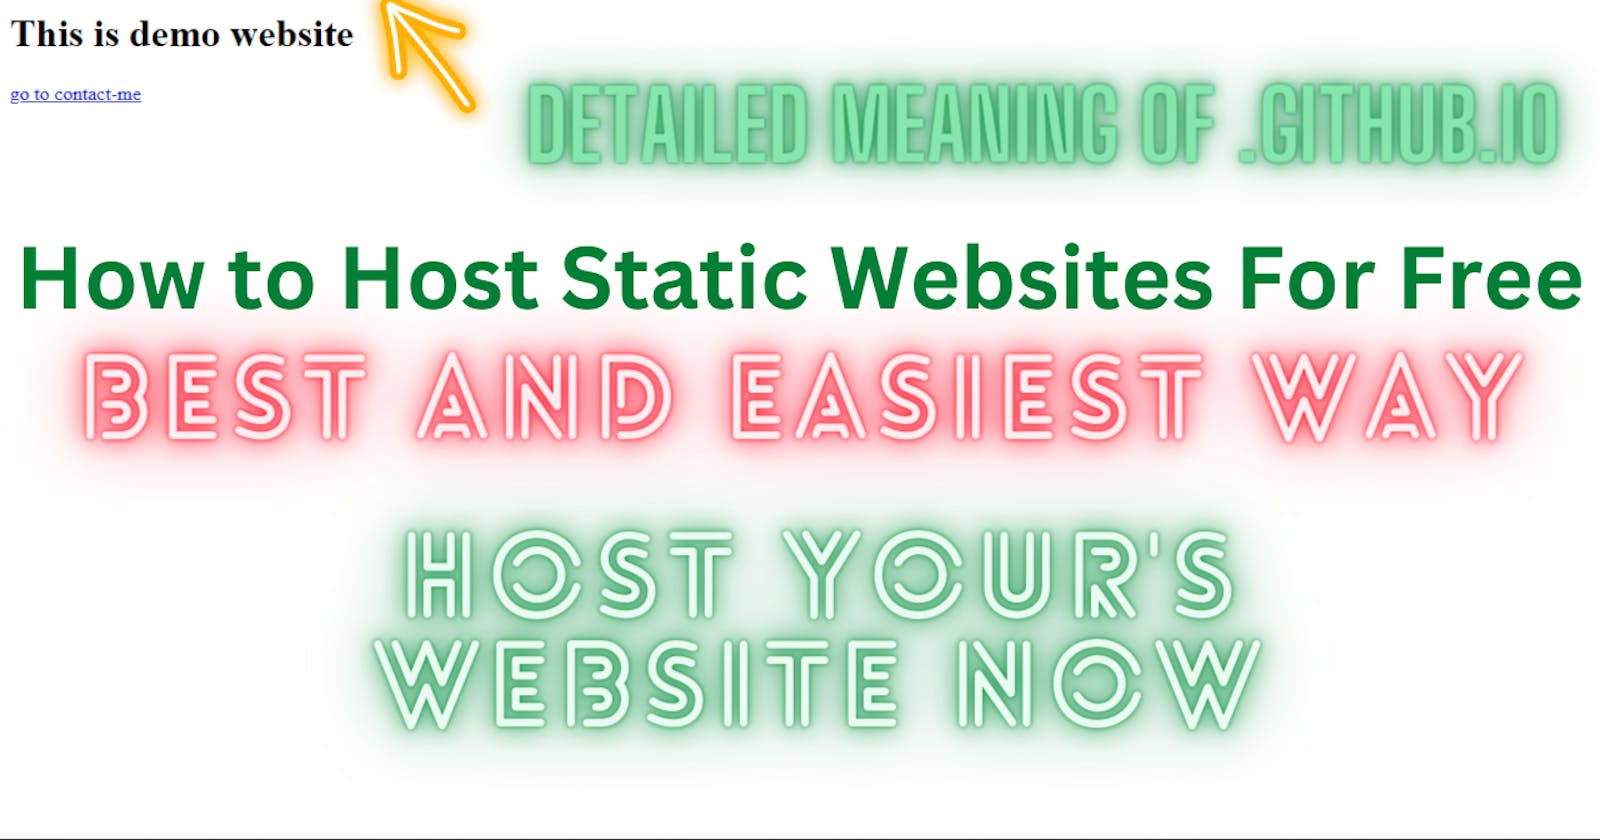 Host Your Websites Now For Free